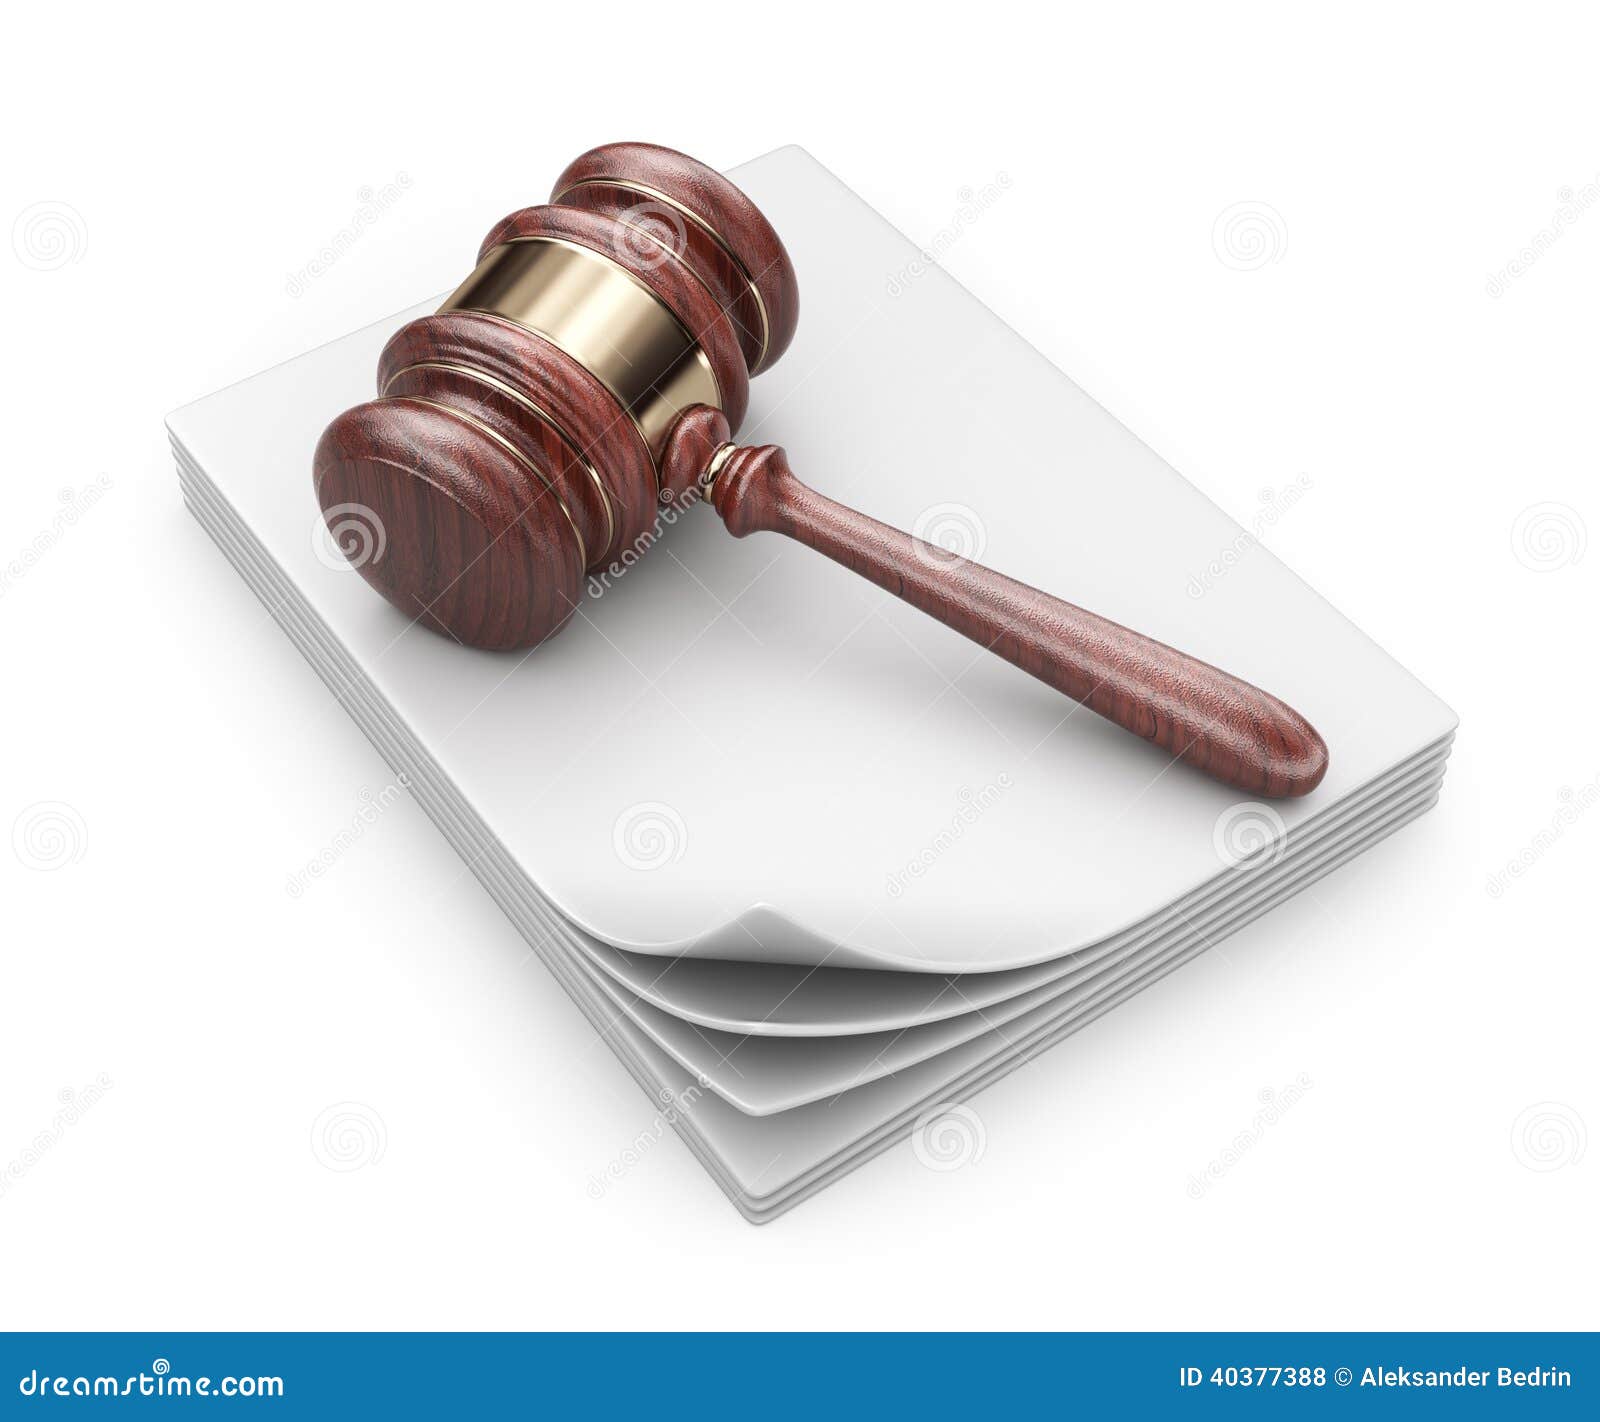 free clipart legal documents - photo #45